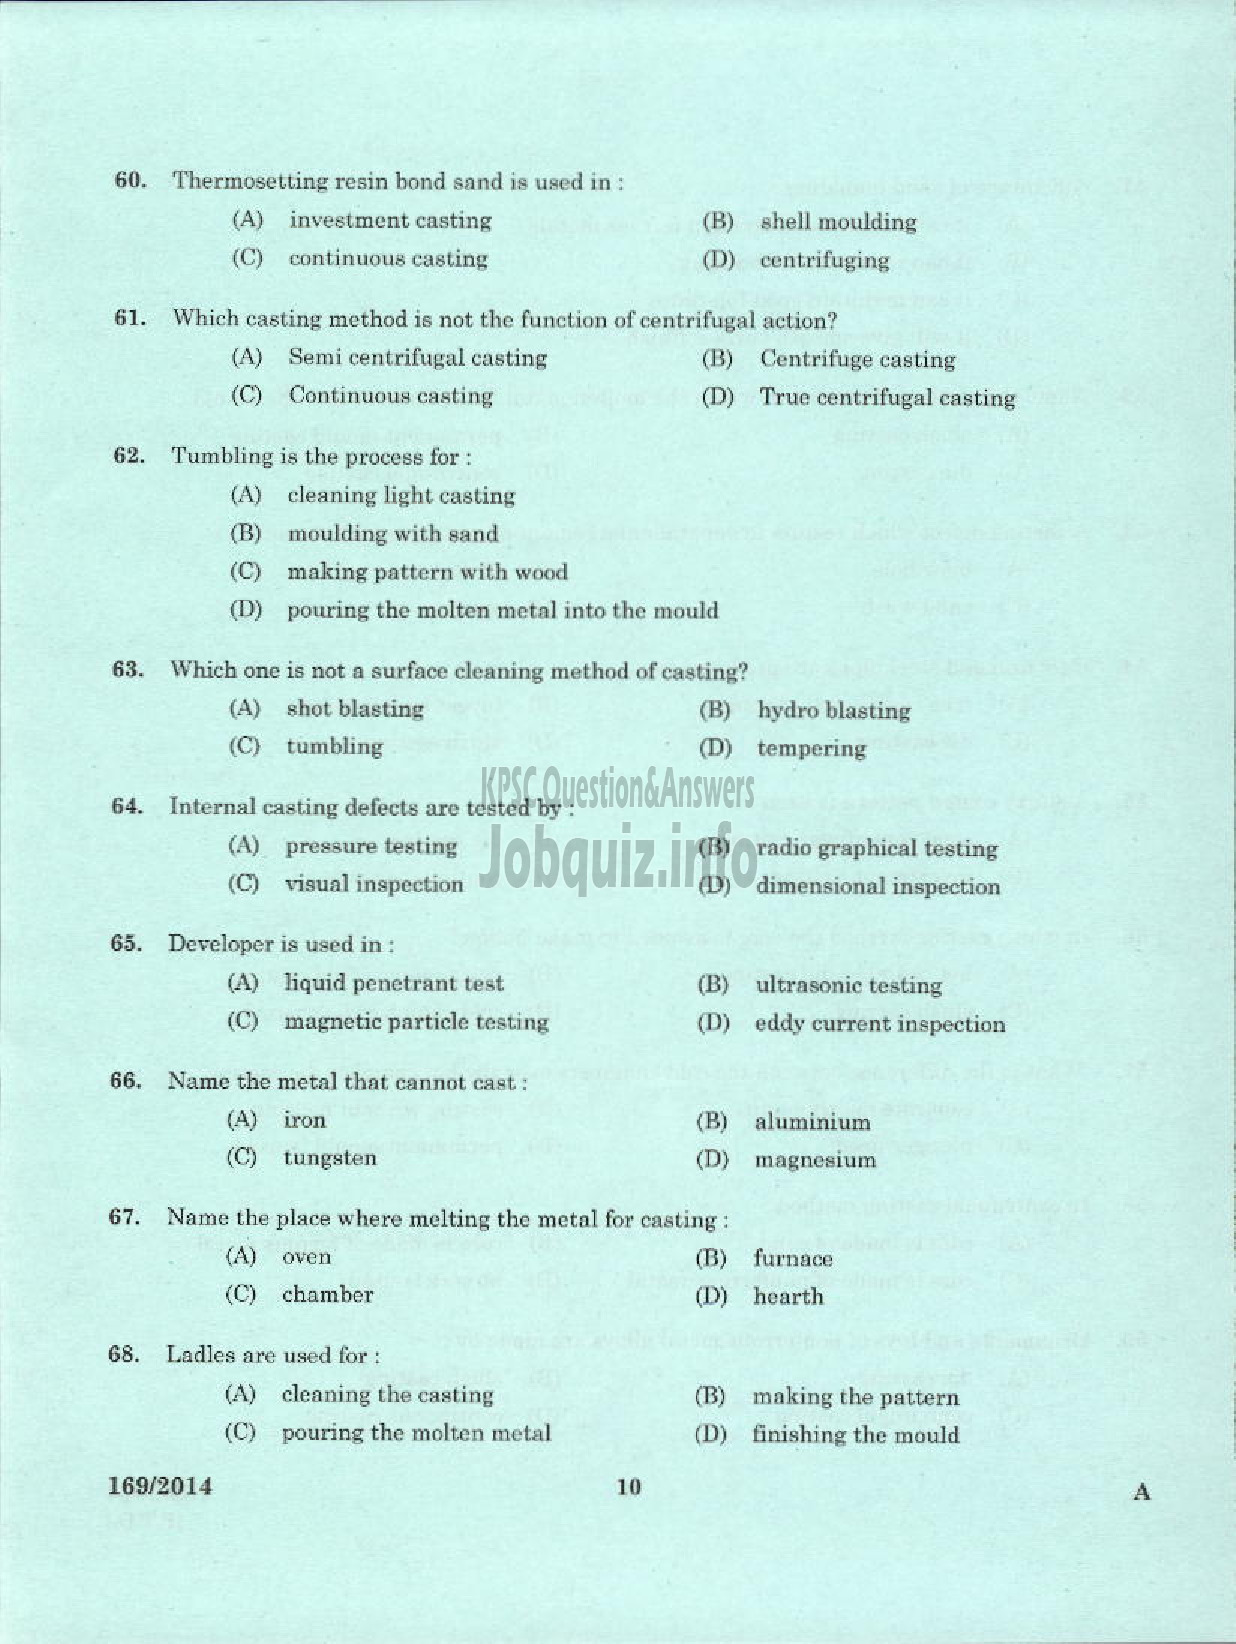 Kerala PSC Question Paper - TRADESMAN MOULDING AND FOUNDRY TECHNICAL EDUCATION TVPM PTA KTM AND TSR-8